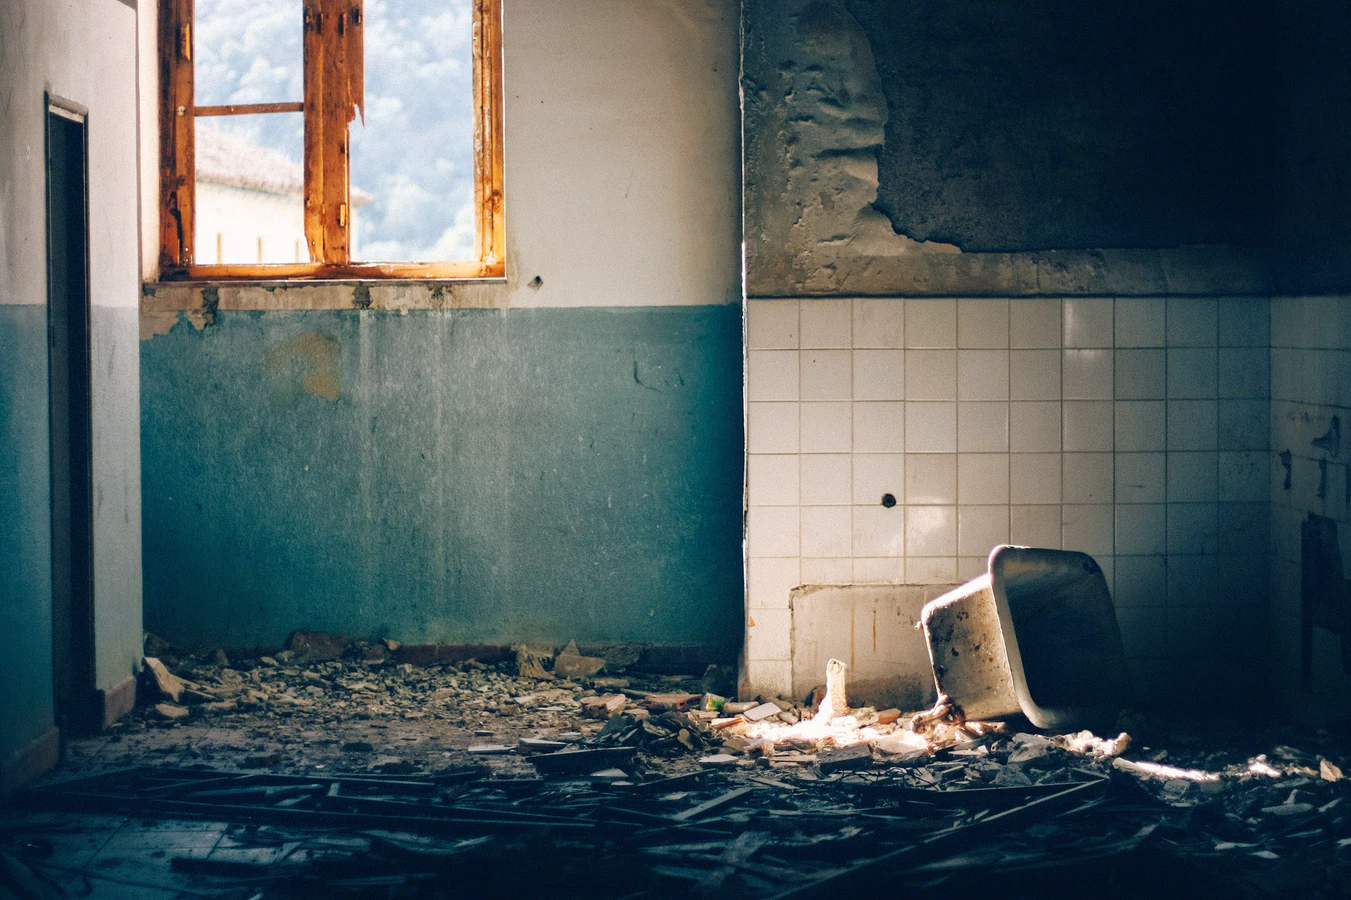 an old abandoned bathroom with smashed tiling and debris on the ground